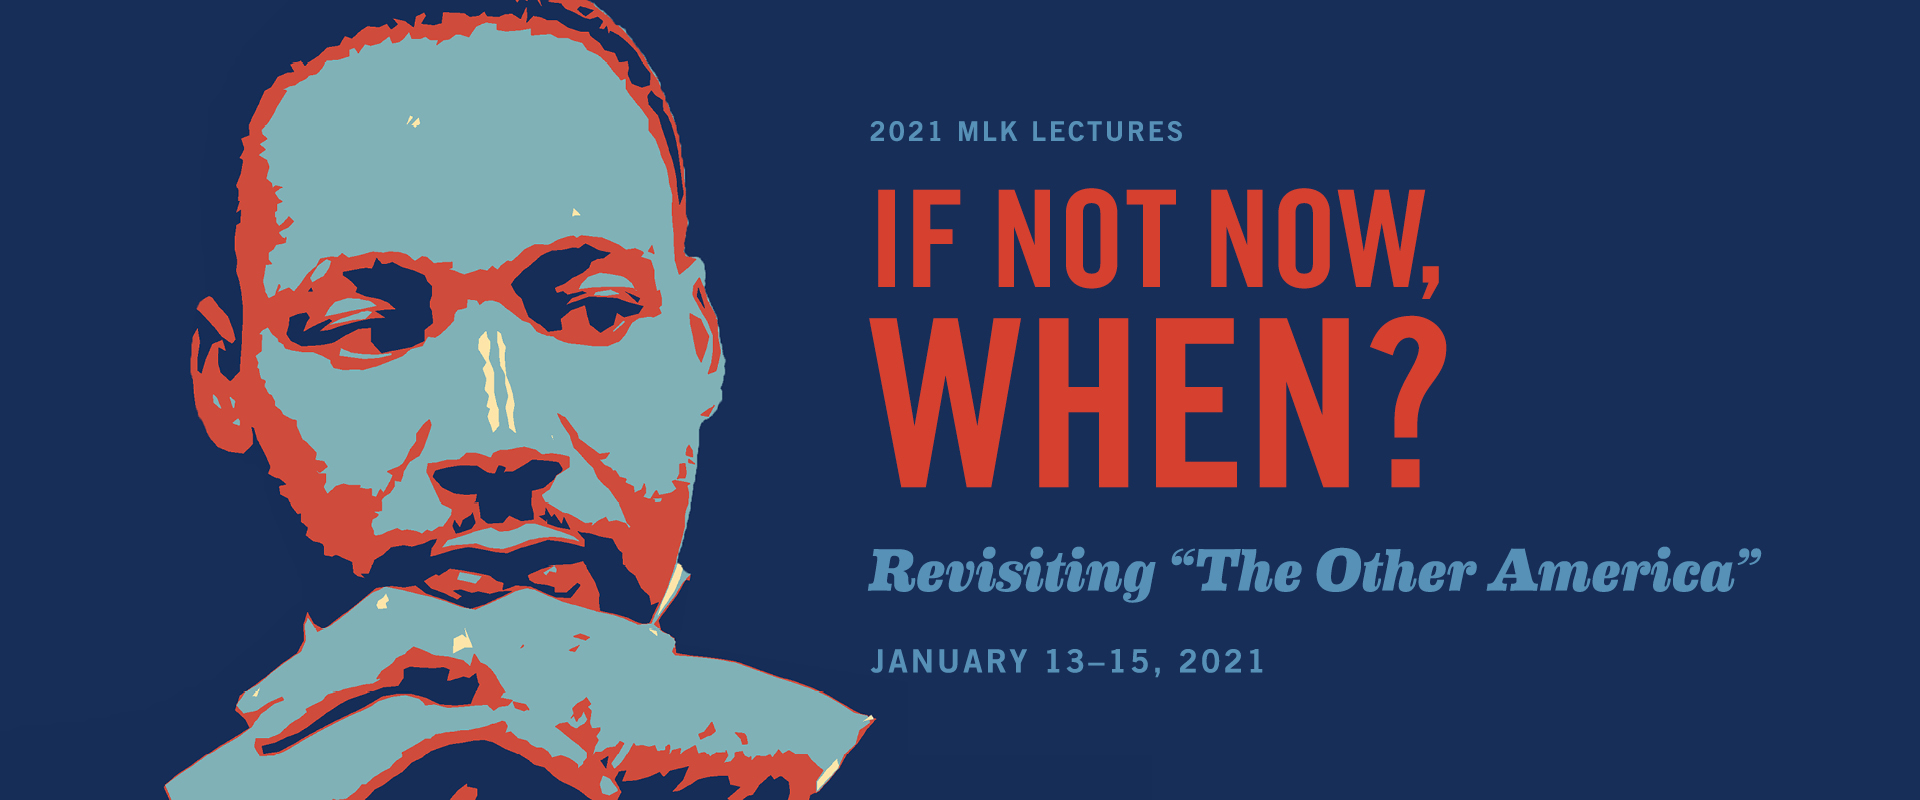 MLK Lectures